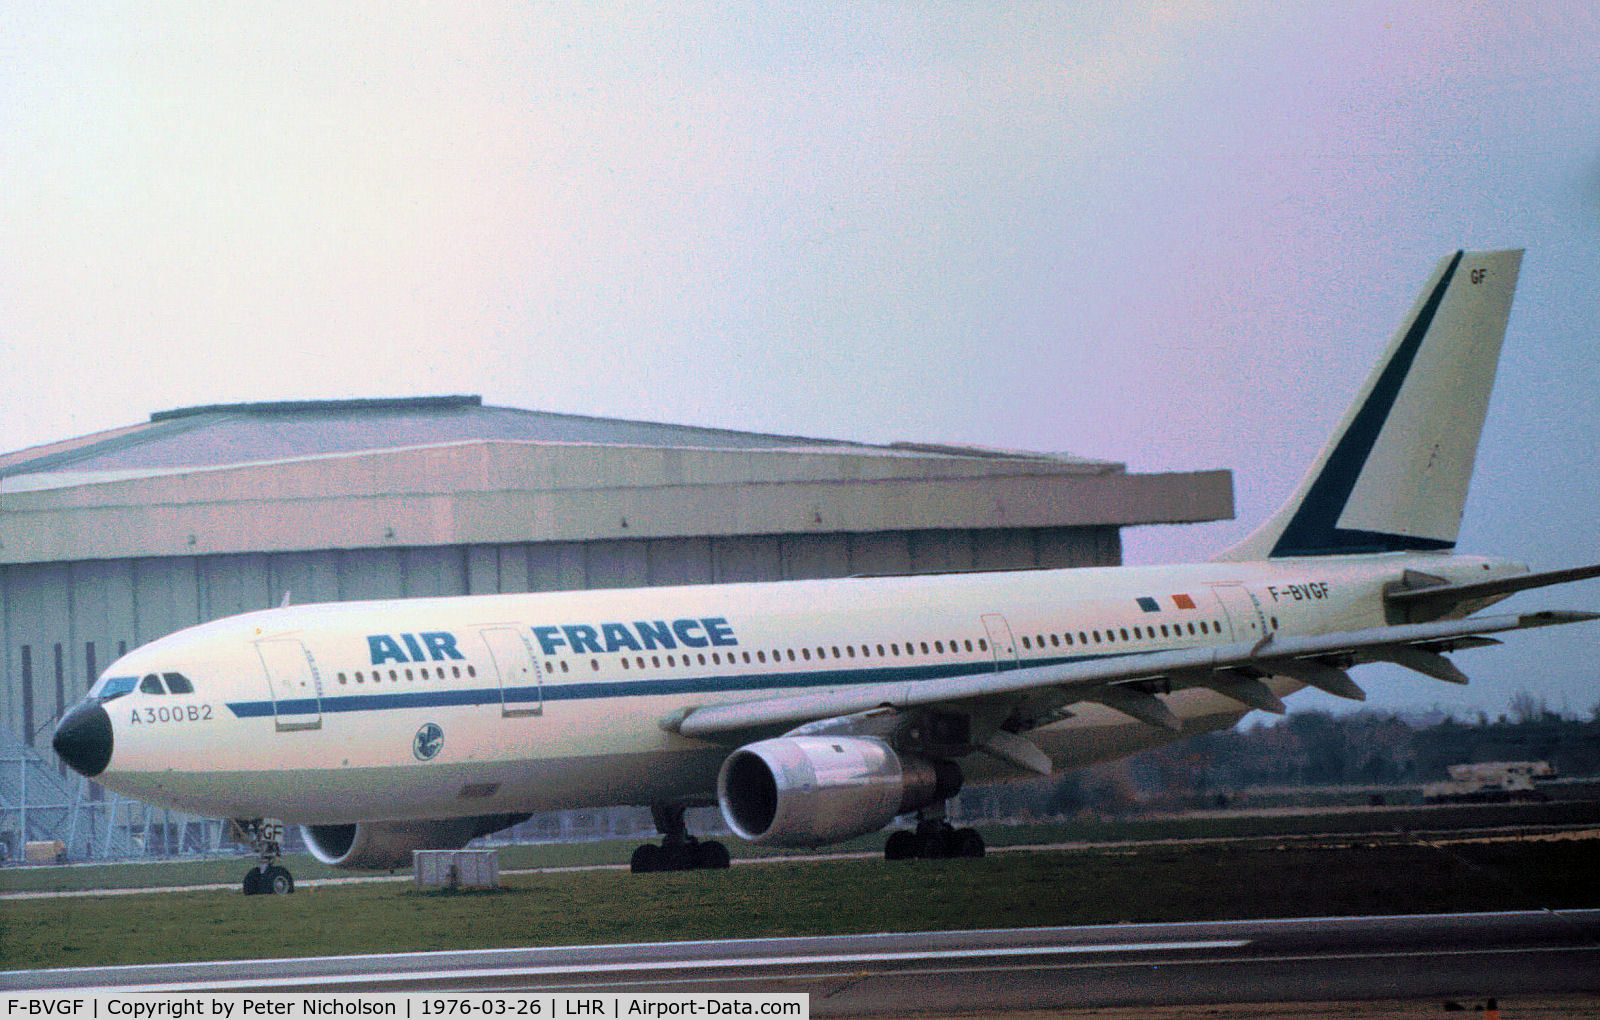 F-BVGF, 1975 Airbus A300B2-1C C/N 13, Airbus A300B2-1C of Air France as seen at Heathrow in the Spring of 1976.